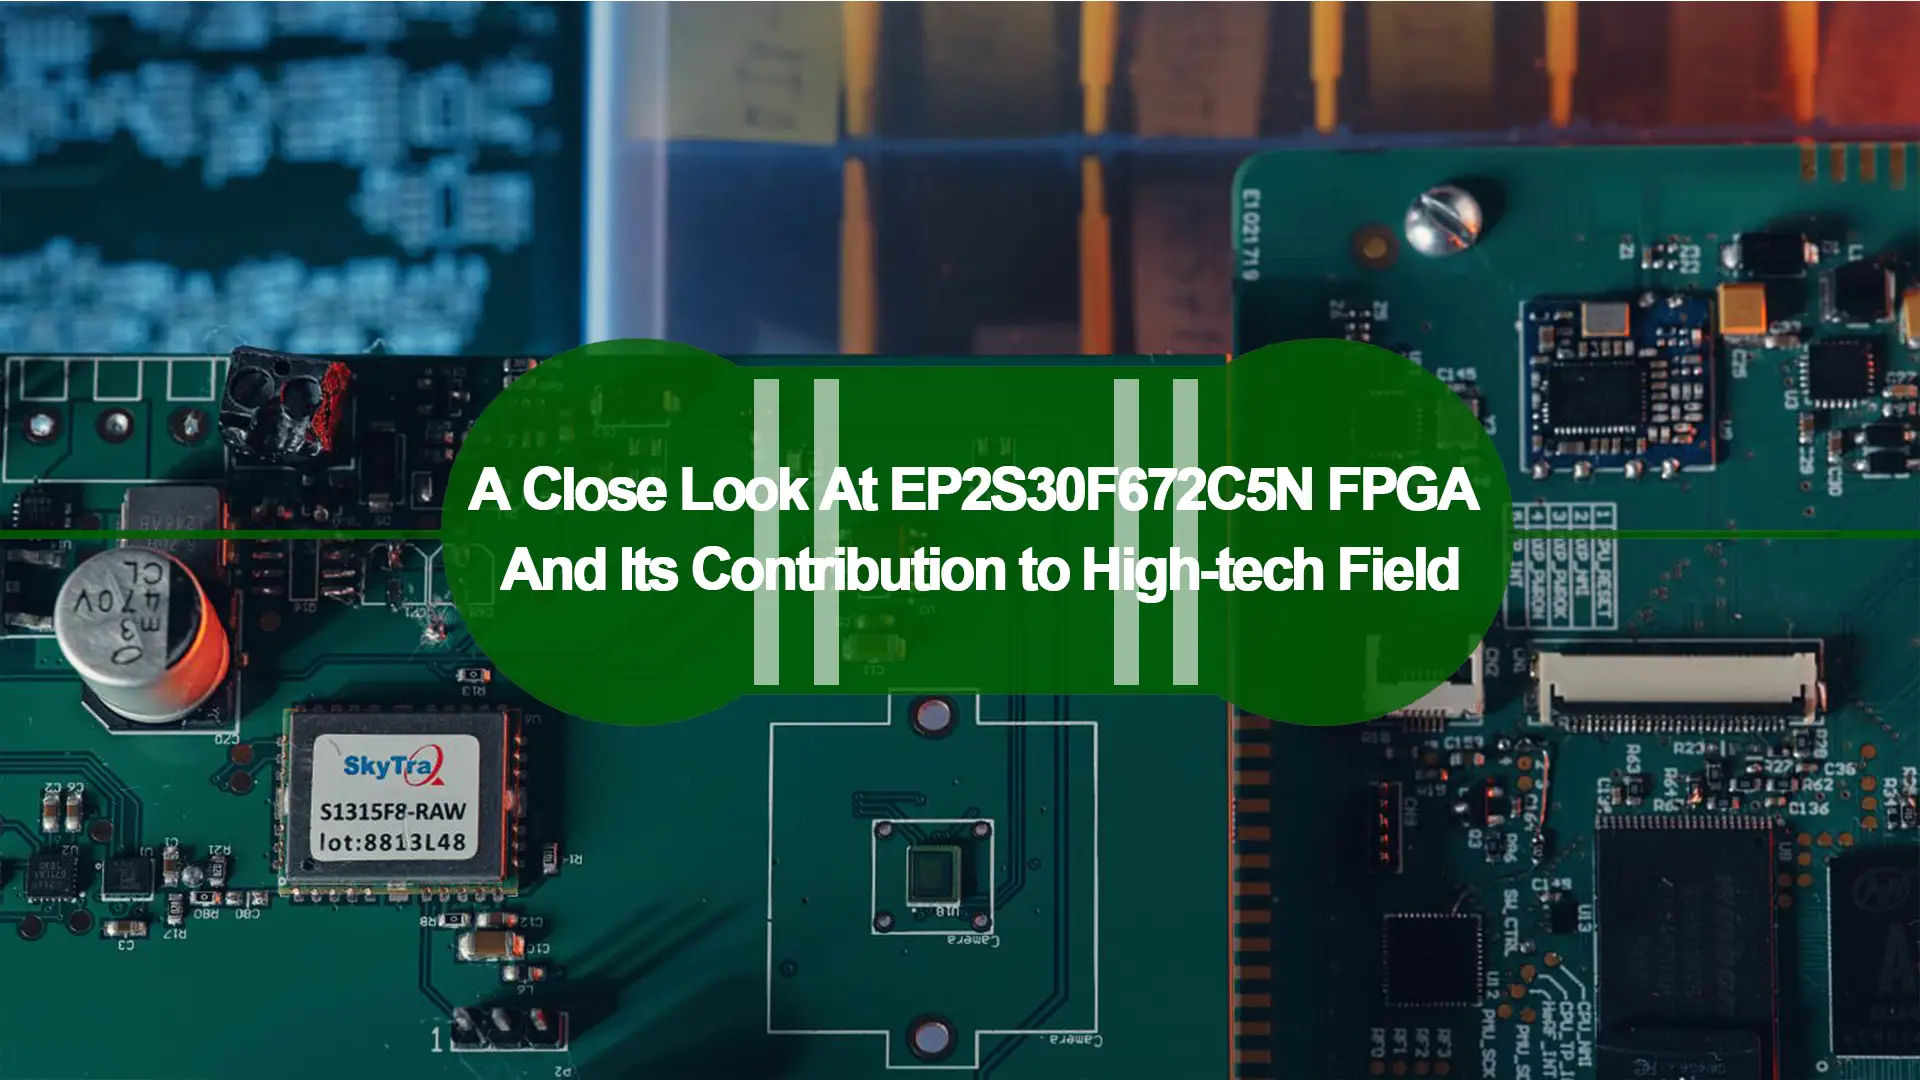 A Close Look At EP2S30F672C5N FPGA And Its Contribution to High-tech Field